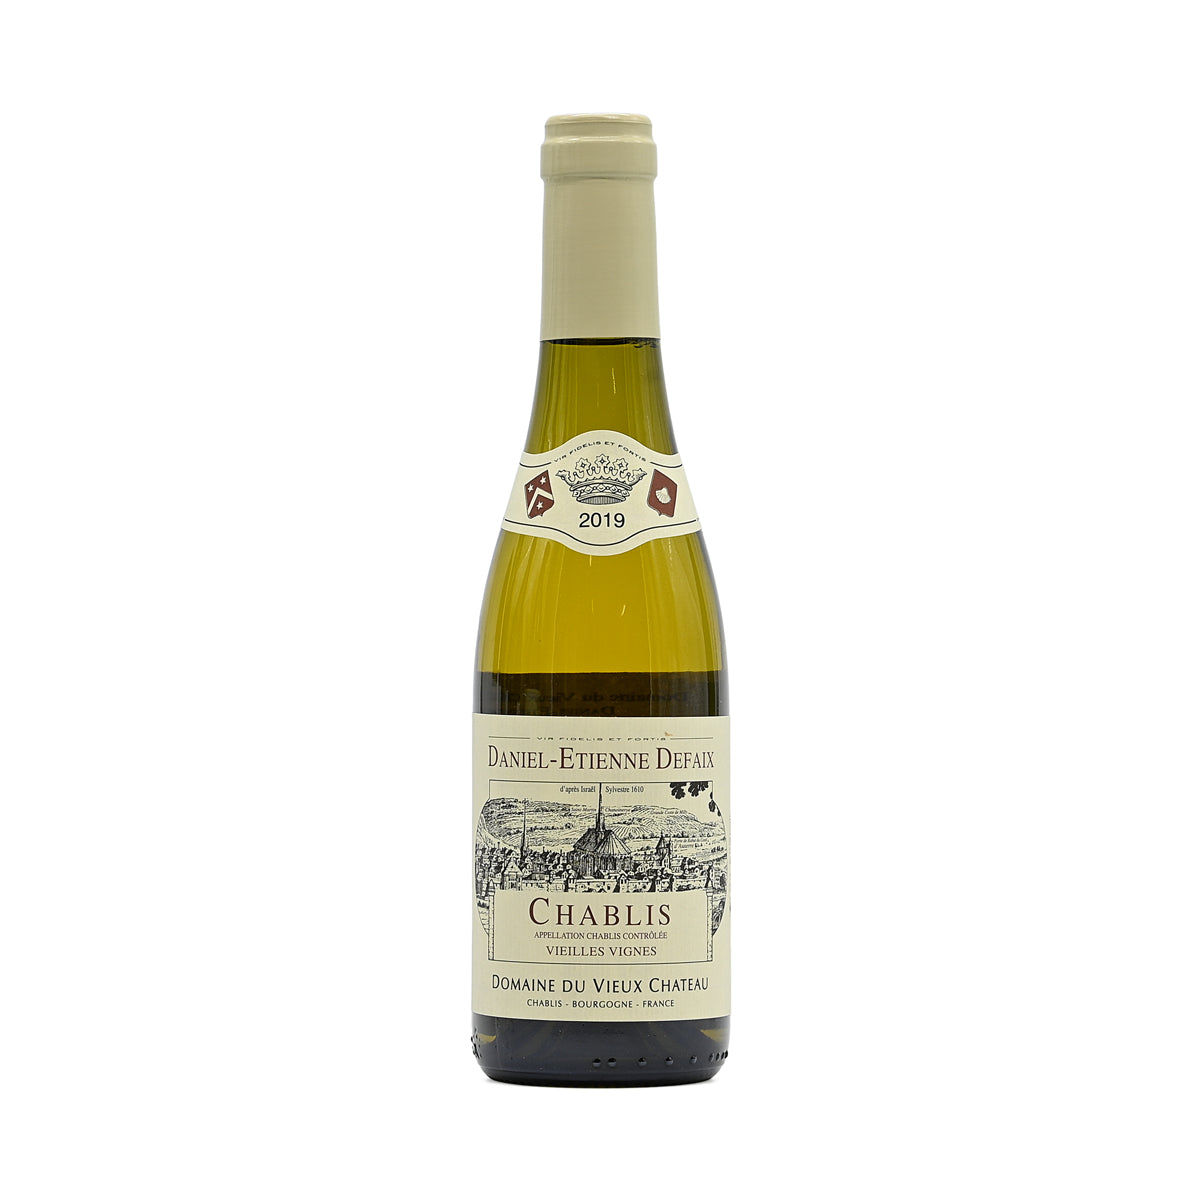 Domaine Daniel-Etienne Defaix Chablis Vieilles Vignes 2019 in half-bottle size, 375ml French white wine, made from Chardonnay; from Chablis Valley, Burgundy, France – GDV Fine Wines, Hong Kong